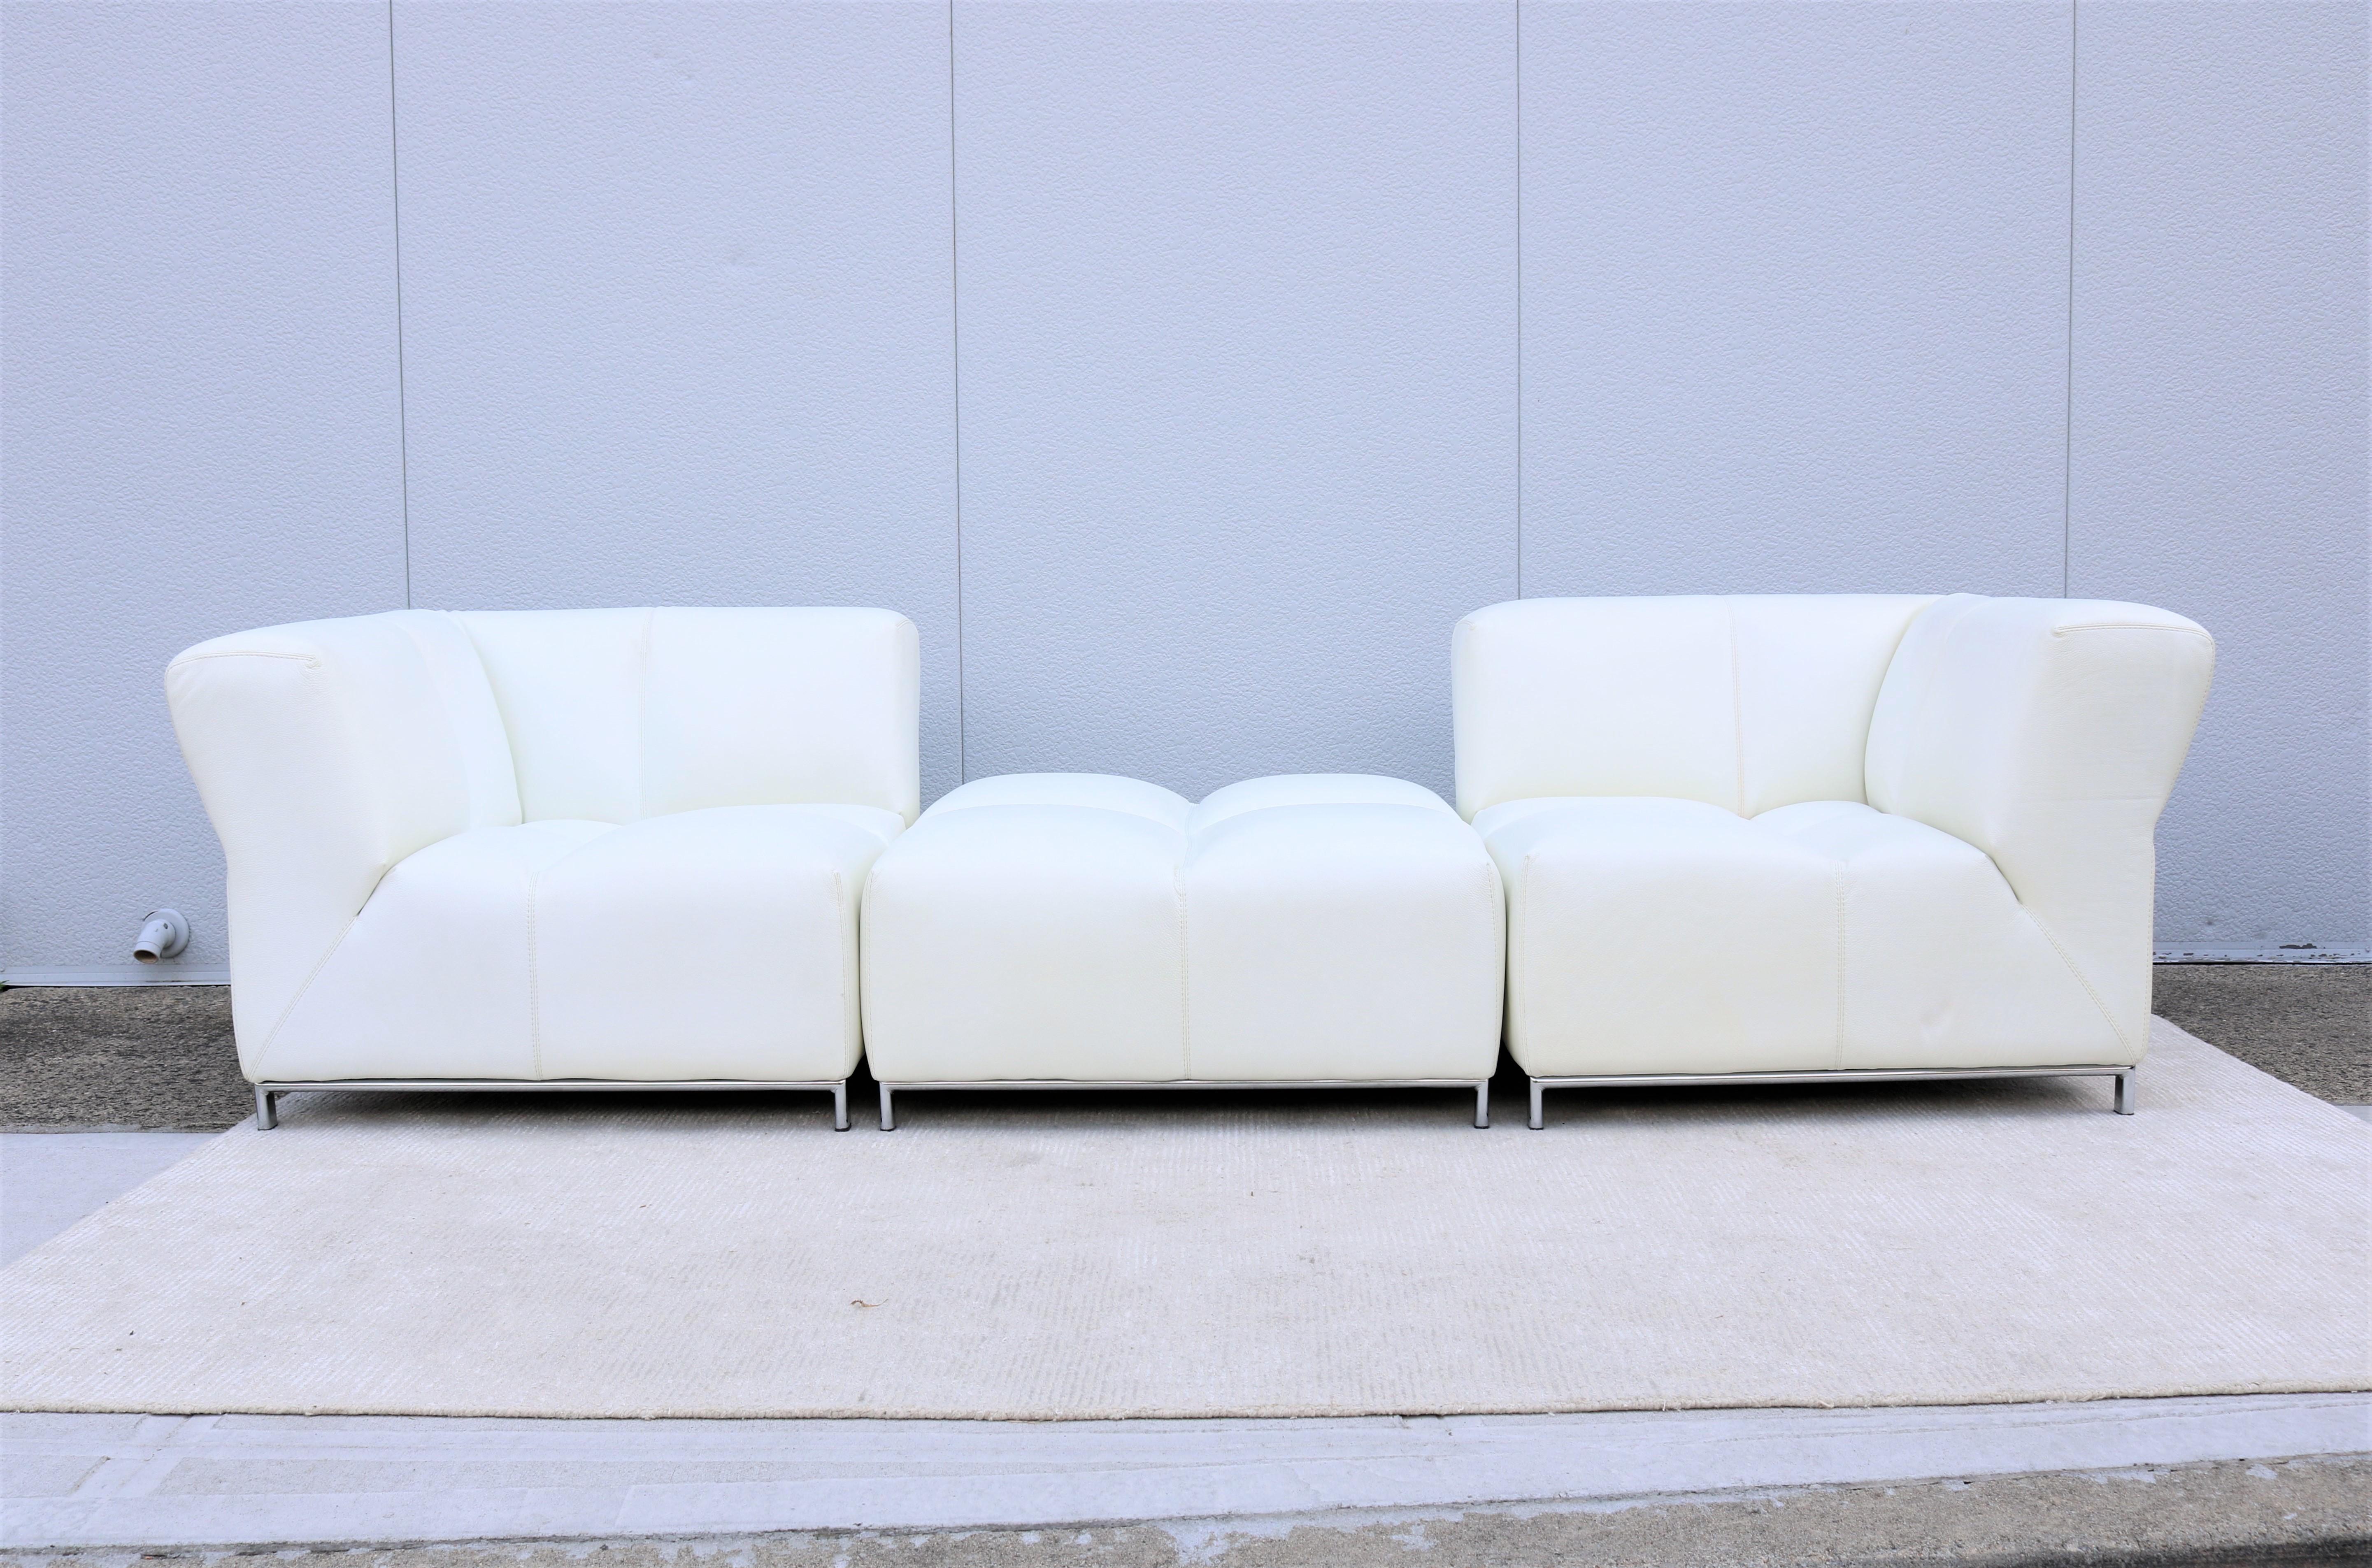 Elegant Modern Domino modular three pieces white leather sofa by Gamma Arredamenti.
Its hallmark is a pristine high-end modern design, modular-seating system, effortlessly delivers supreme comfort levels and real relaxation for hours on end.
Defined